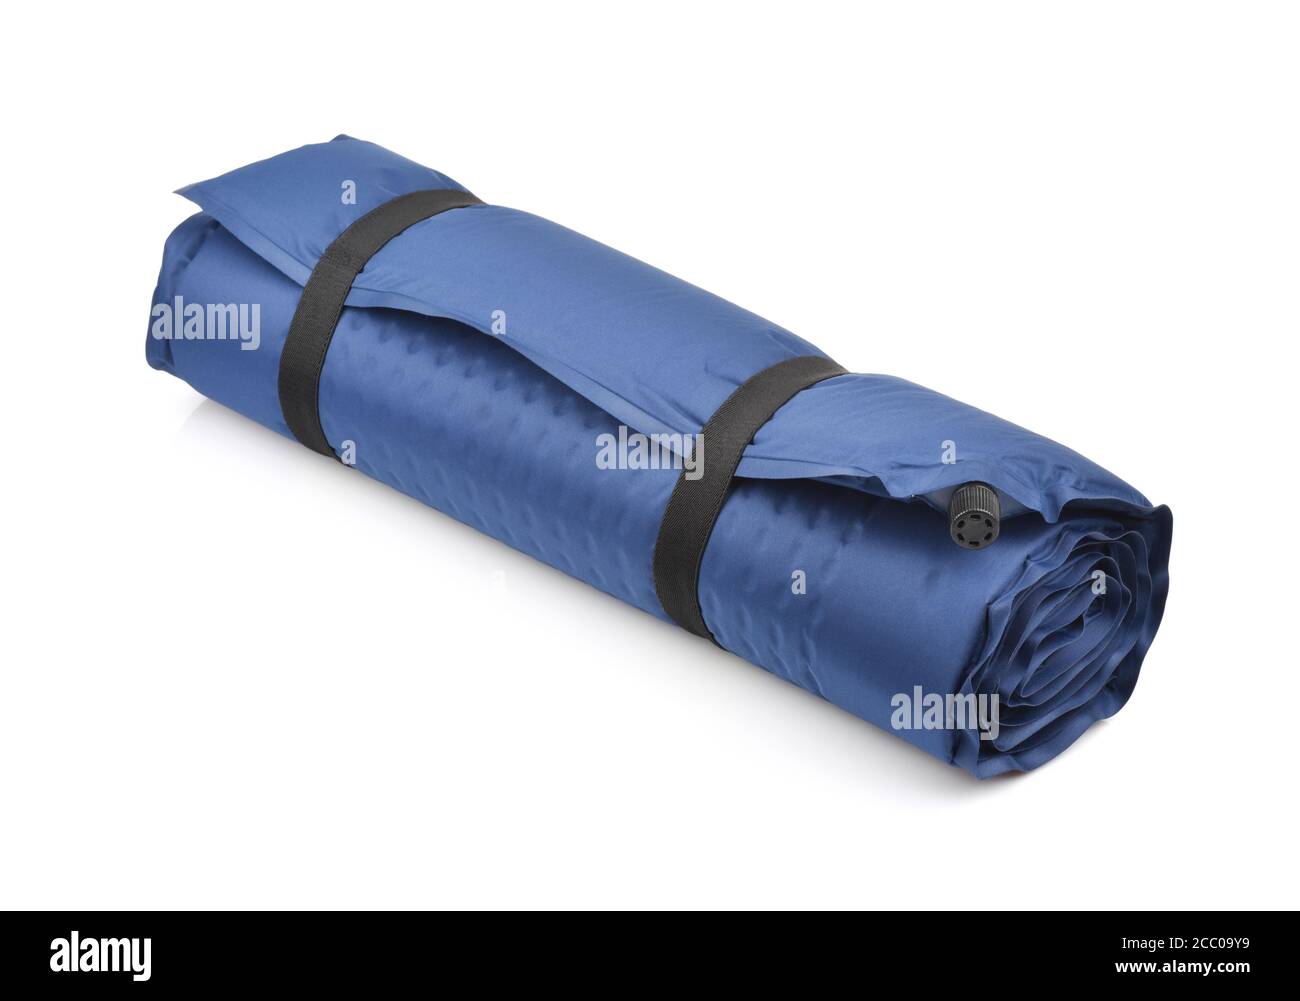 Rolled blue self-inflating camping mattress isolated on white Stock Photo